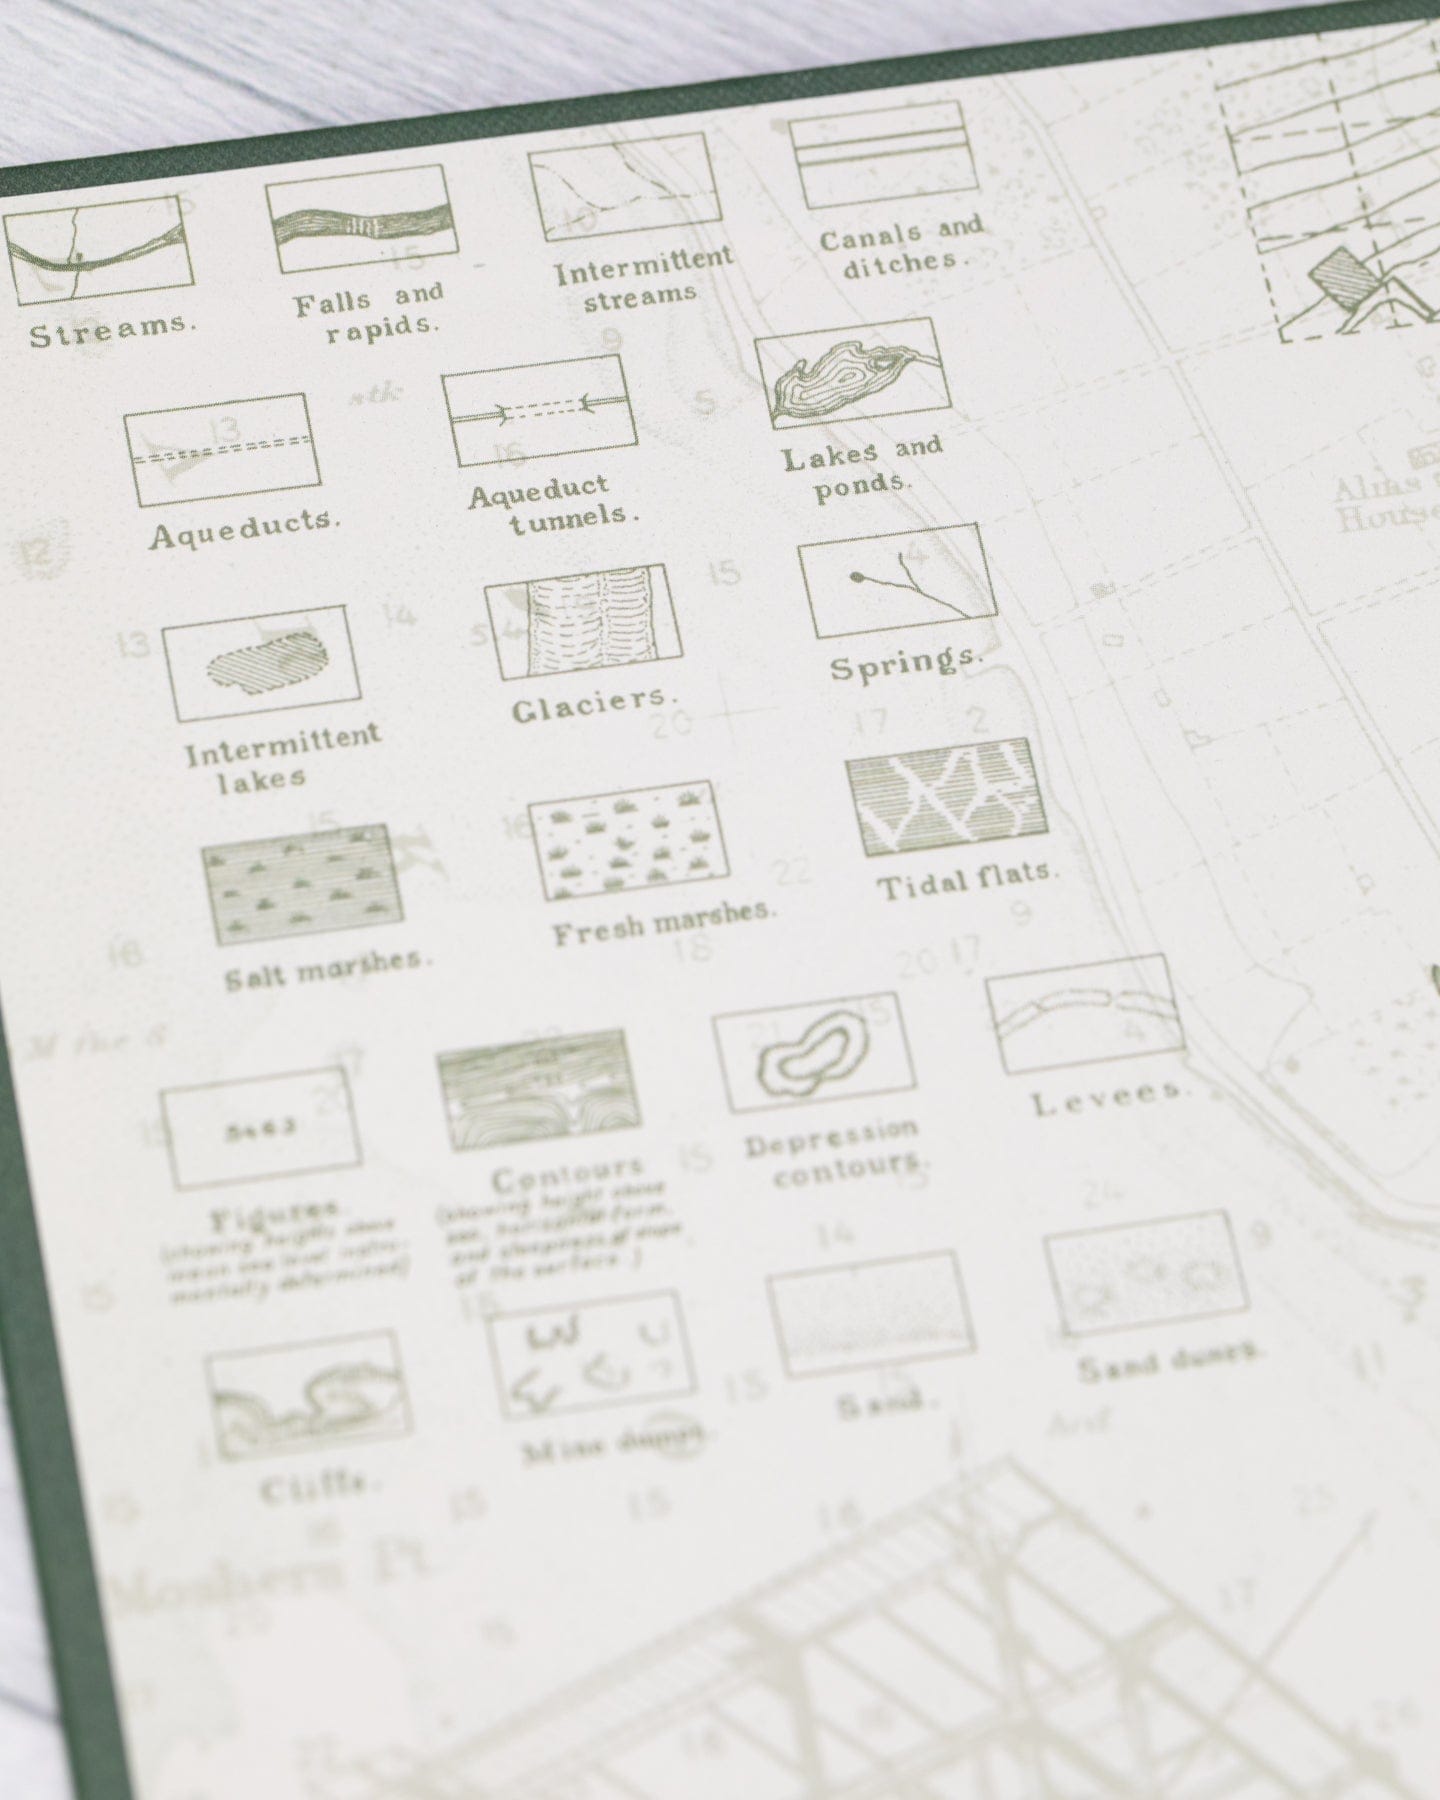 Take well-constructed notes in this blueprint-paper notebook - The Gadgeteer